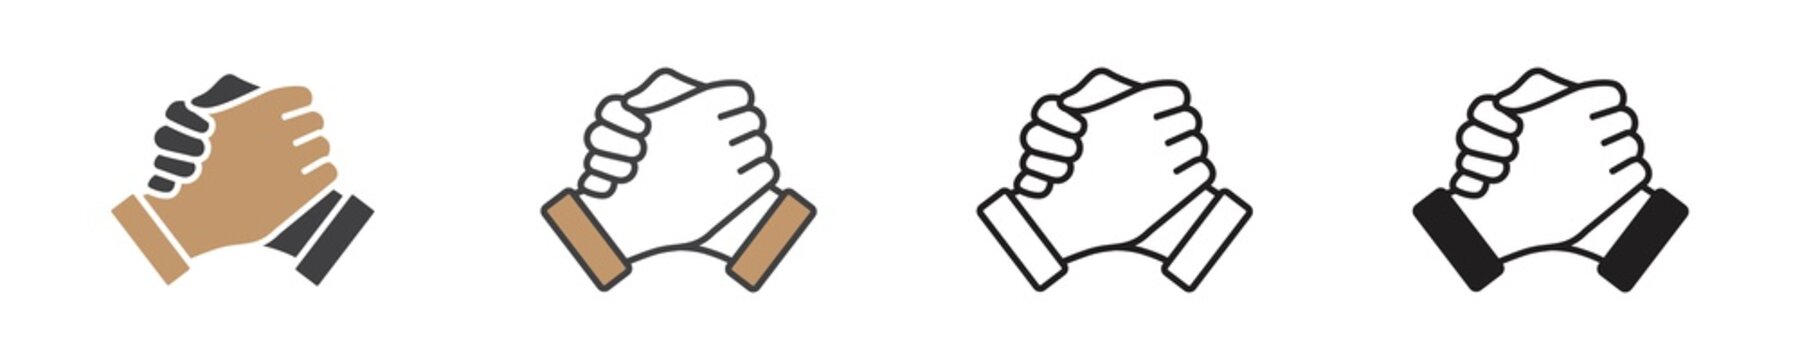 Soul brother handshake icon in different style, thumb clasp handshake vector illustration